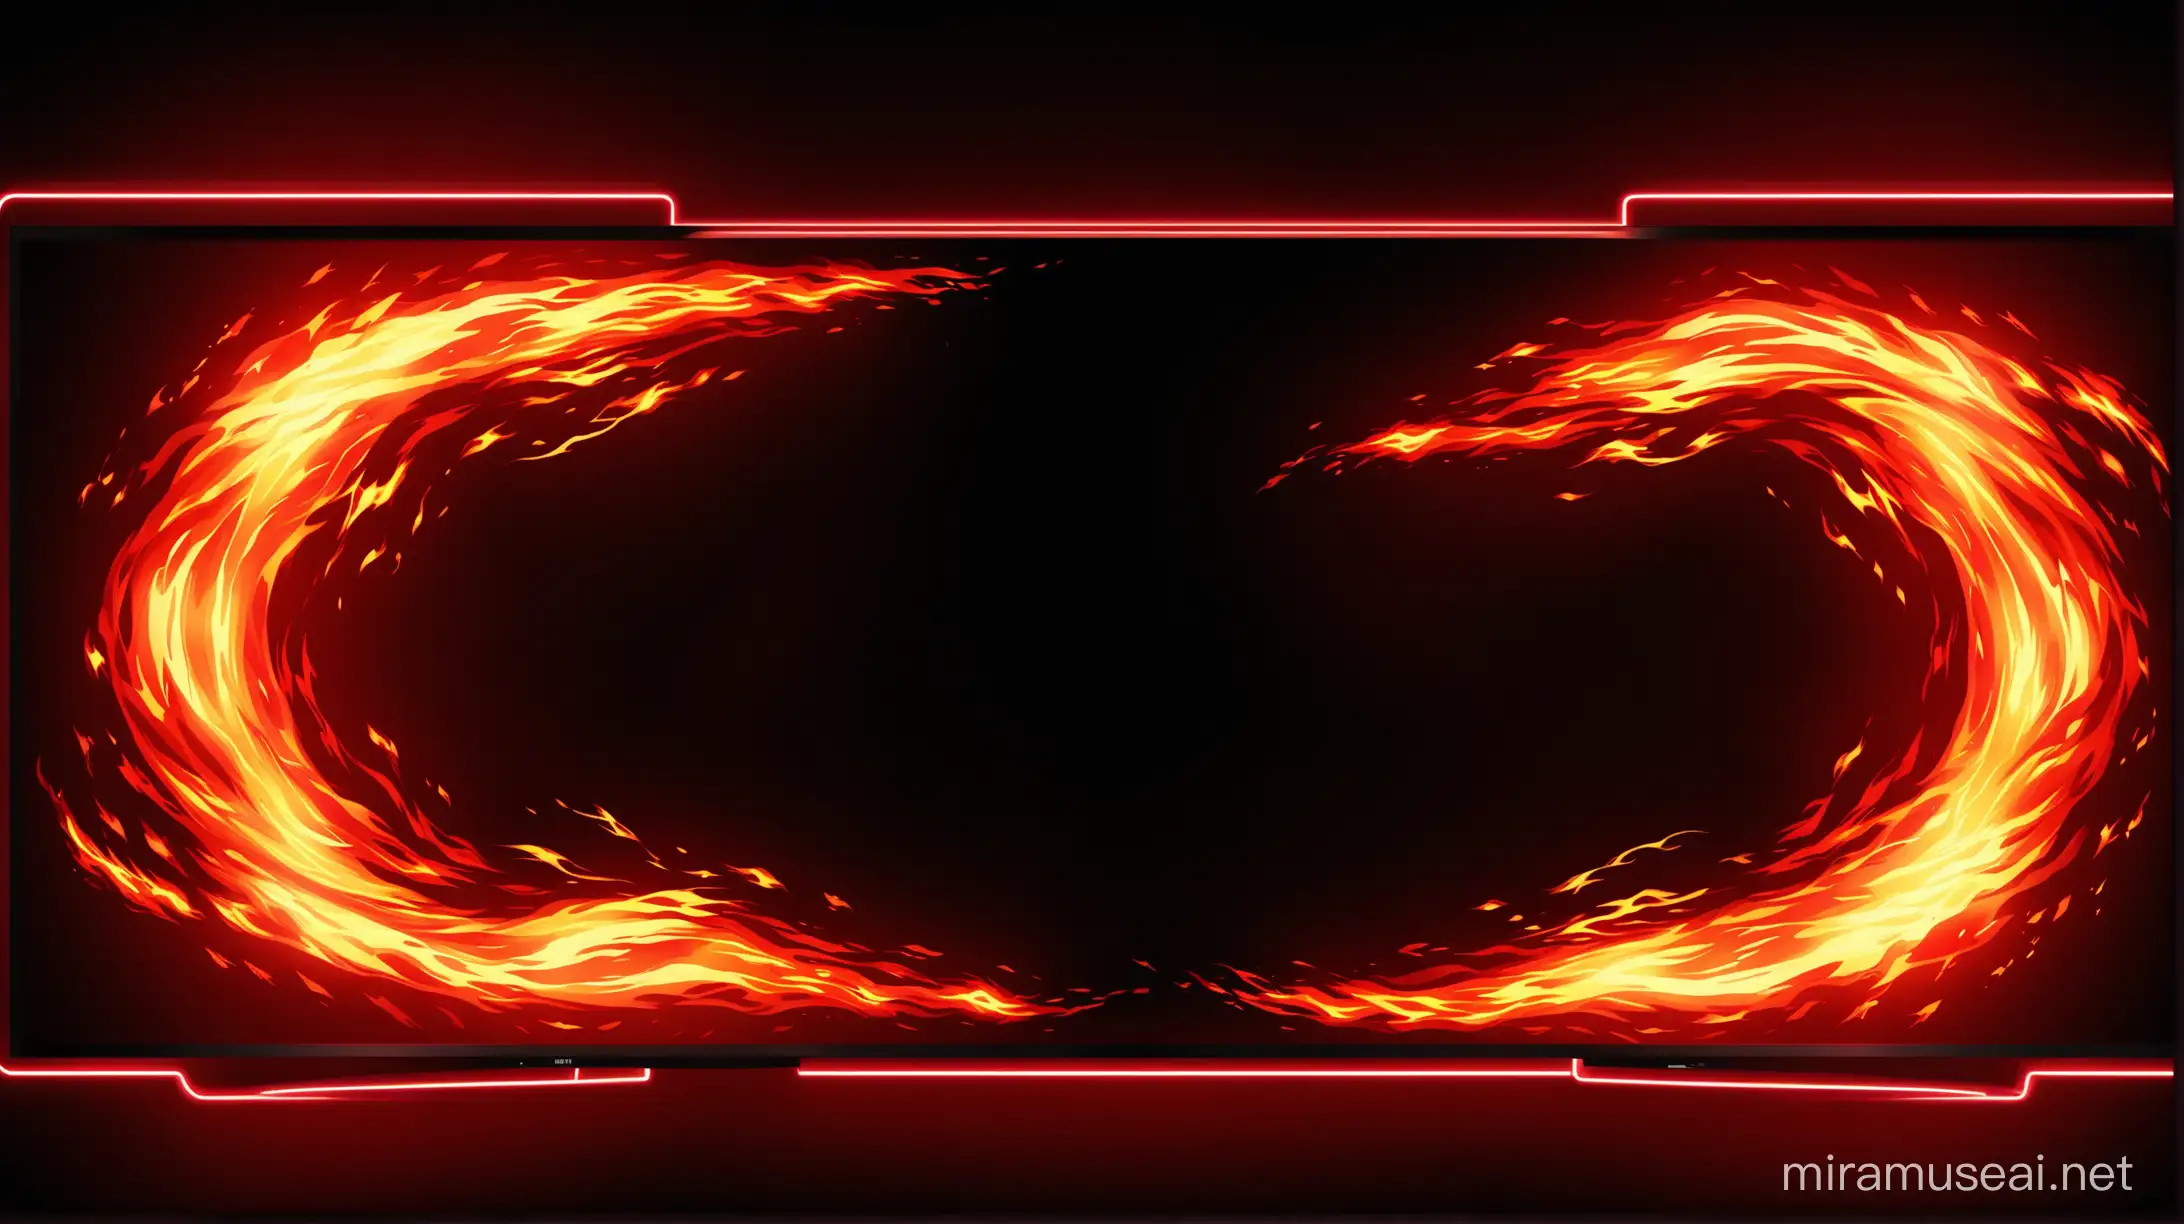 PURE NEON RED-WHITE CRAZY FIRE GOING FROM LEFT TO THE RIGHT SIDE OF THE SCREEN IN A DARK  BACKGROUND